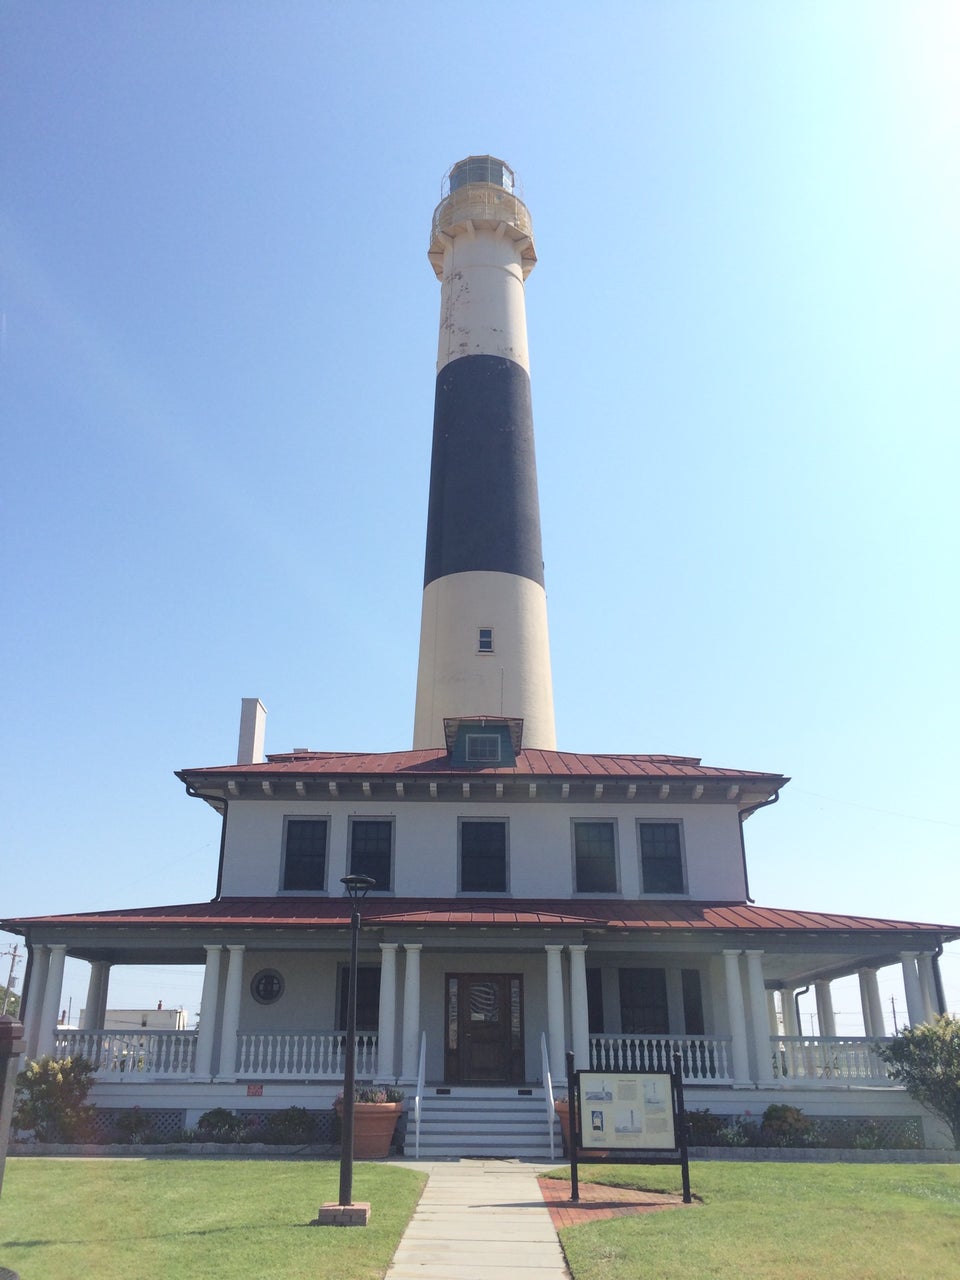 Photo of Absecon Lighthouse